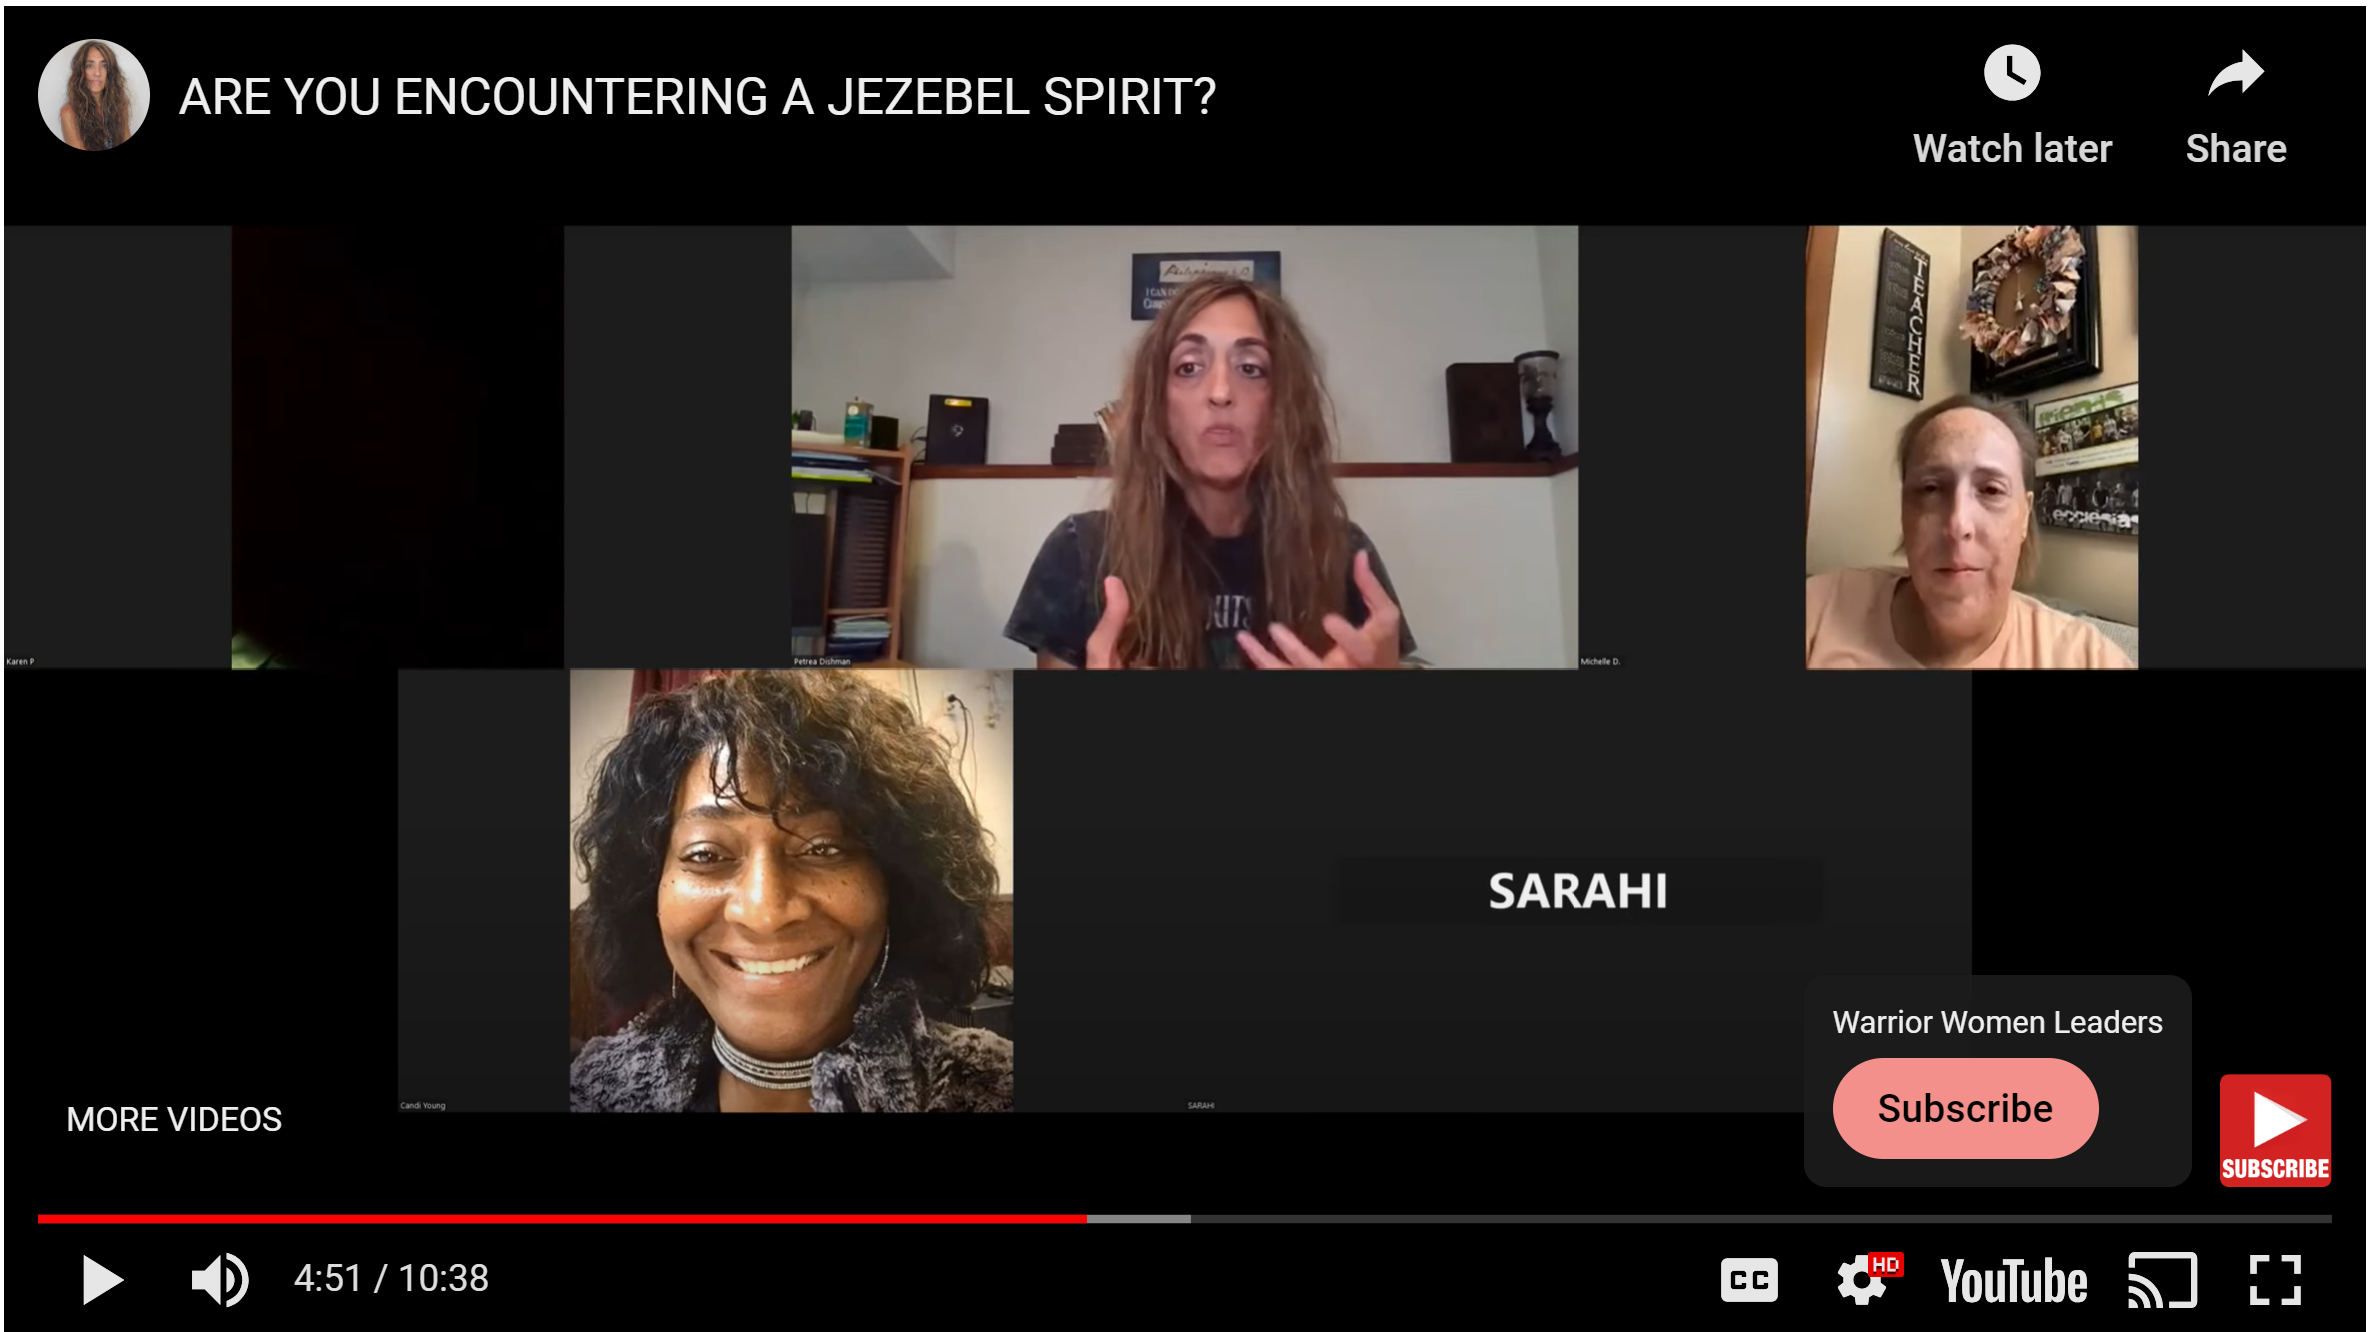 Are you encountering a jezebel spirit